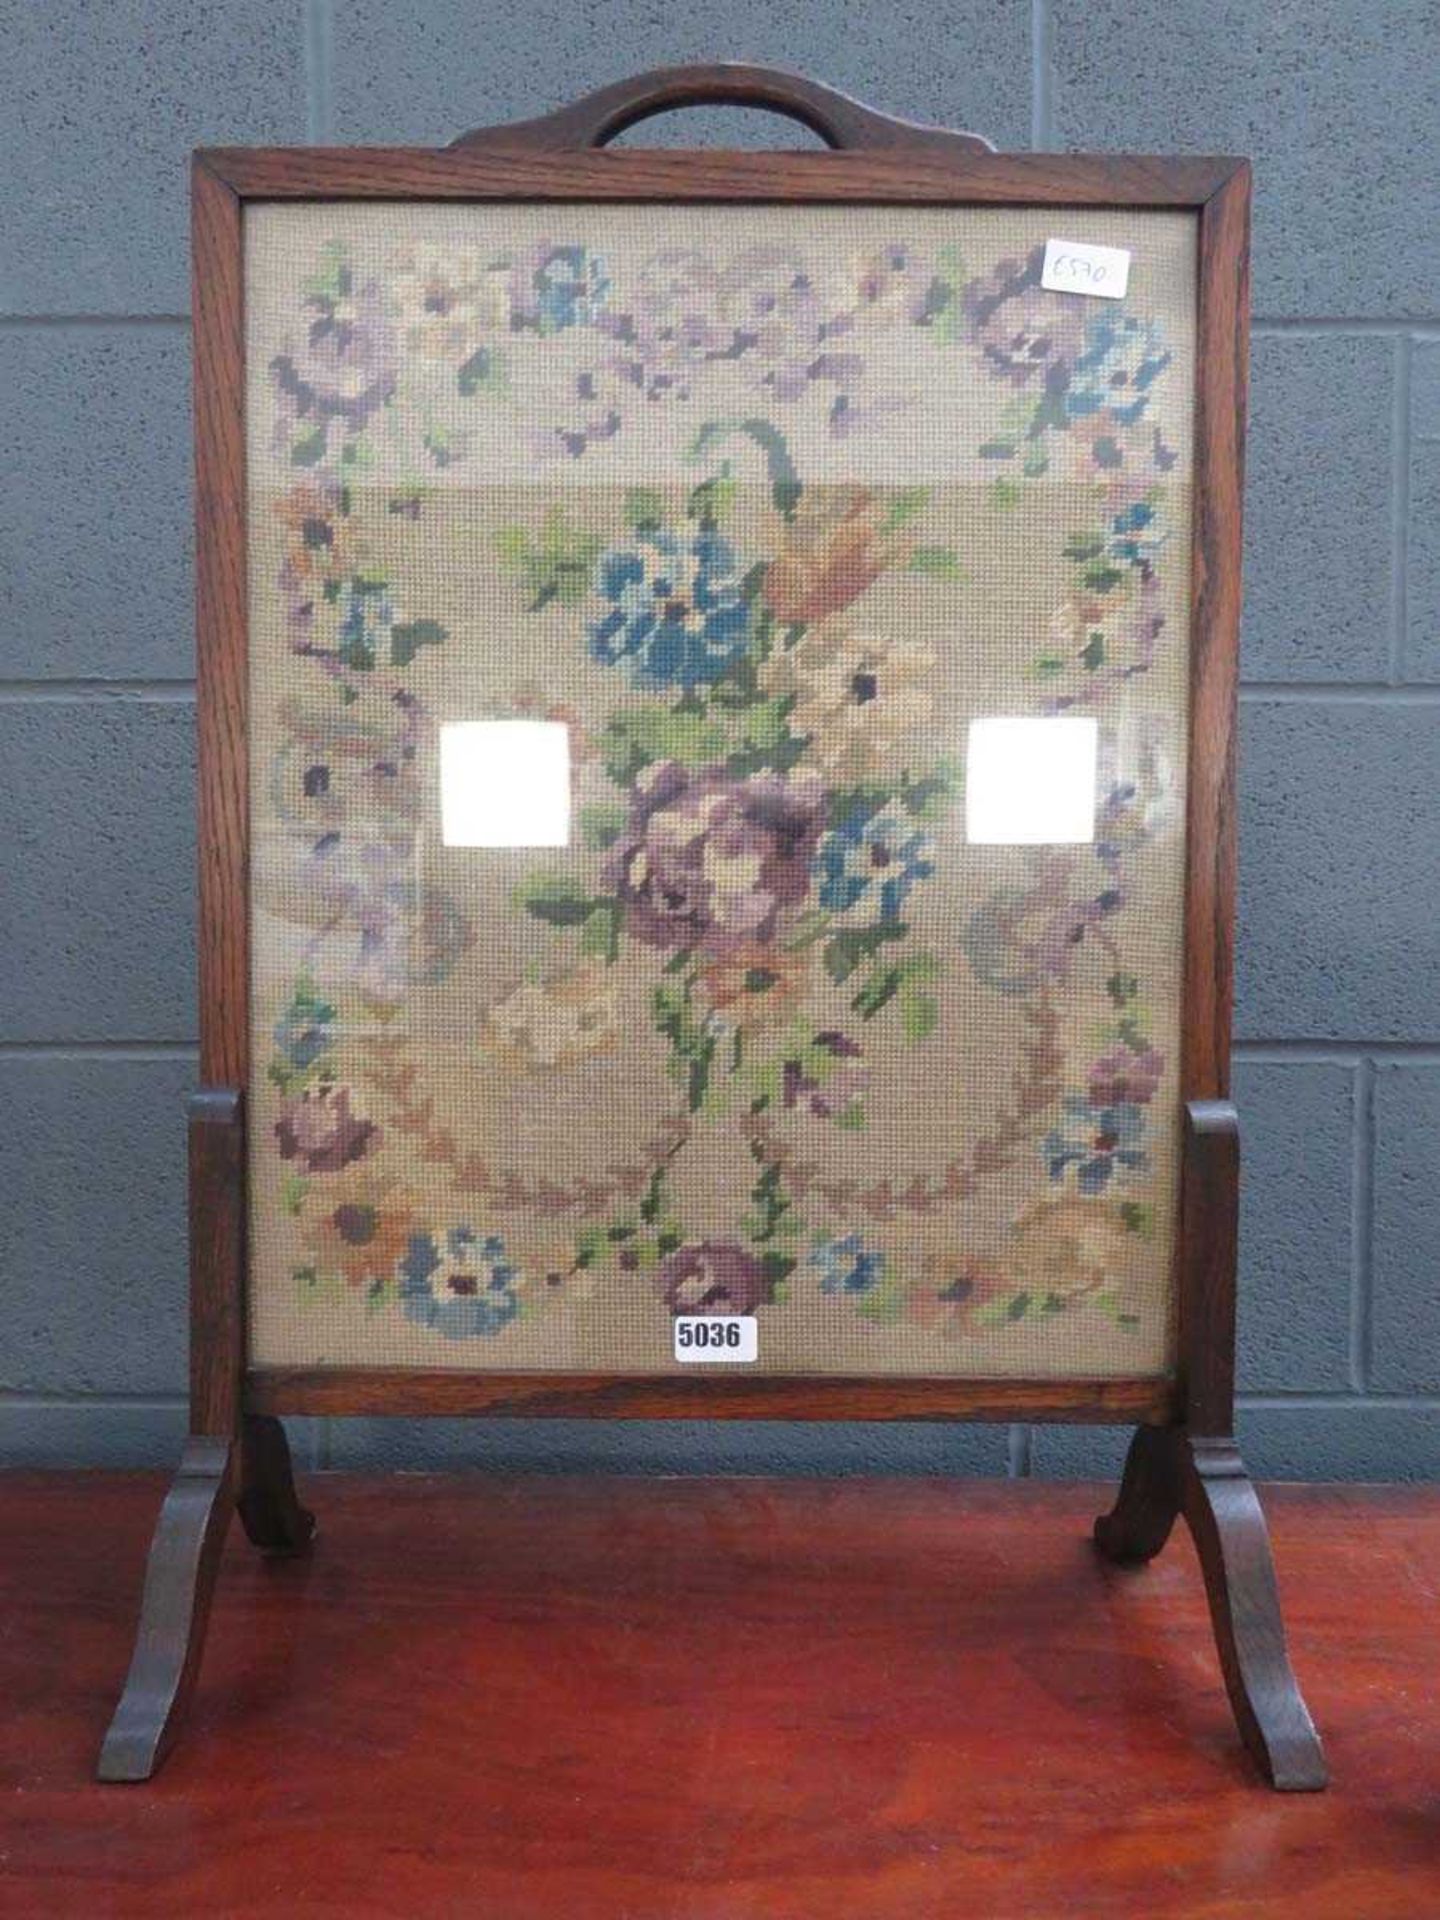 Oak fire screen with embroided panel